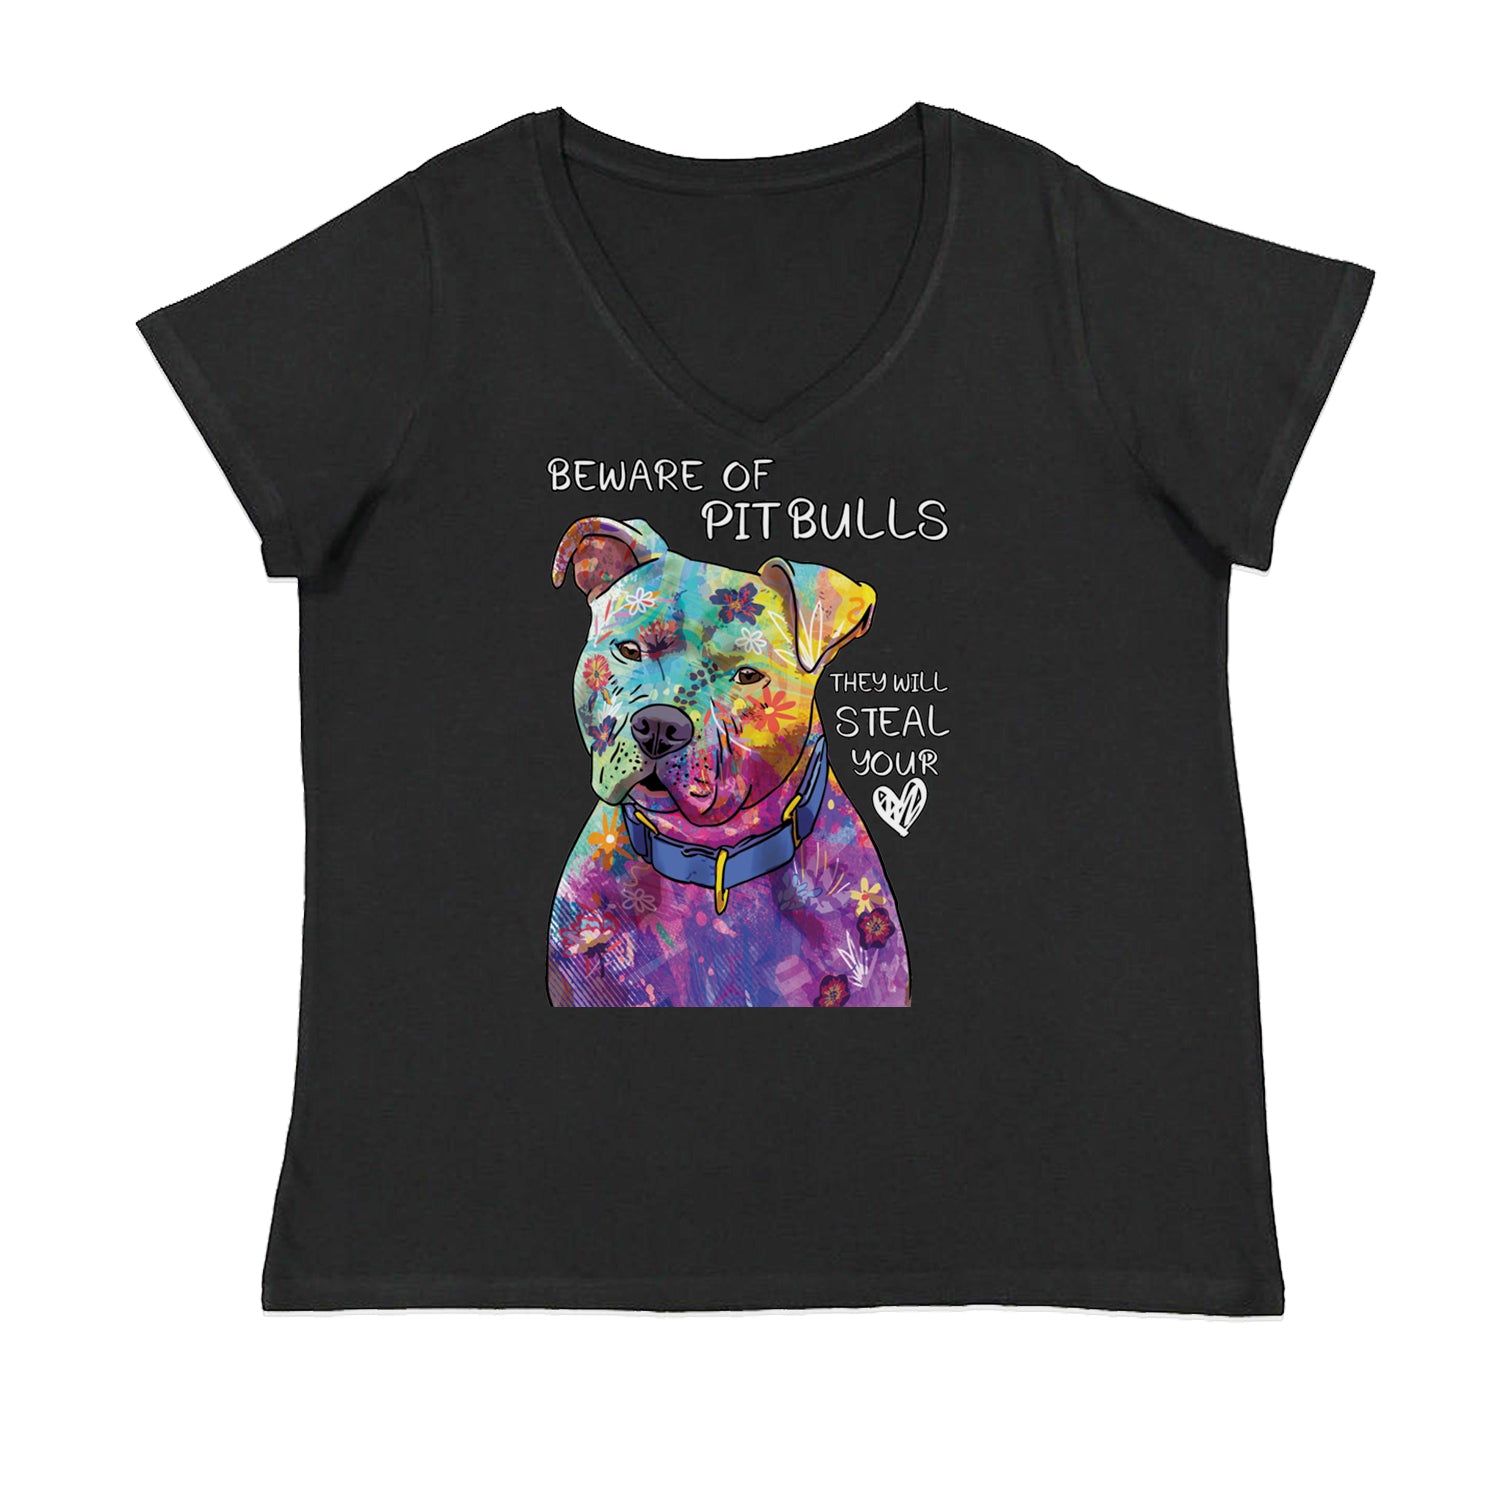 Beware Of Pit Bulls, They Will Steal Your Heart  Womens Plus Size V-Neck T-shirt